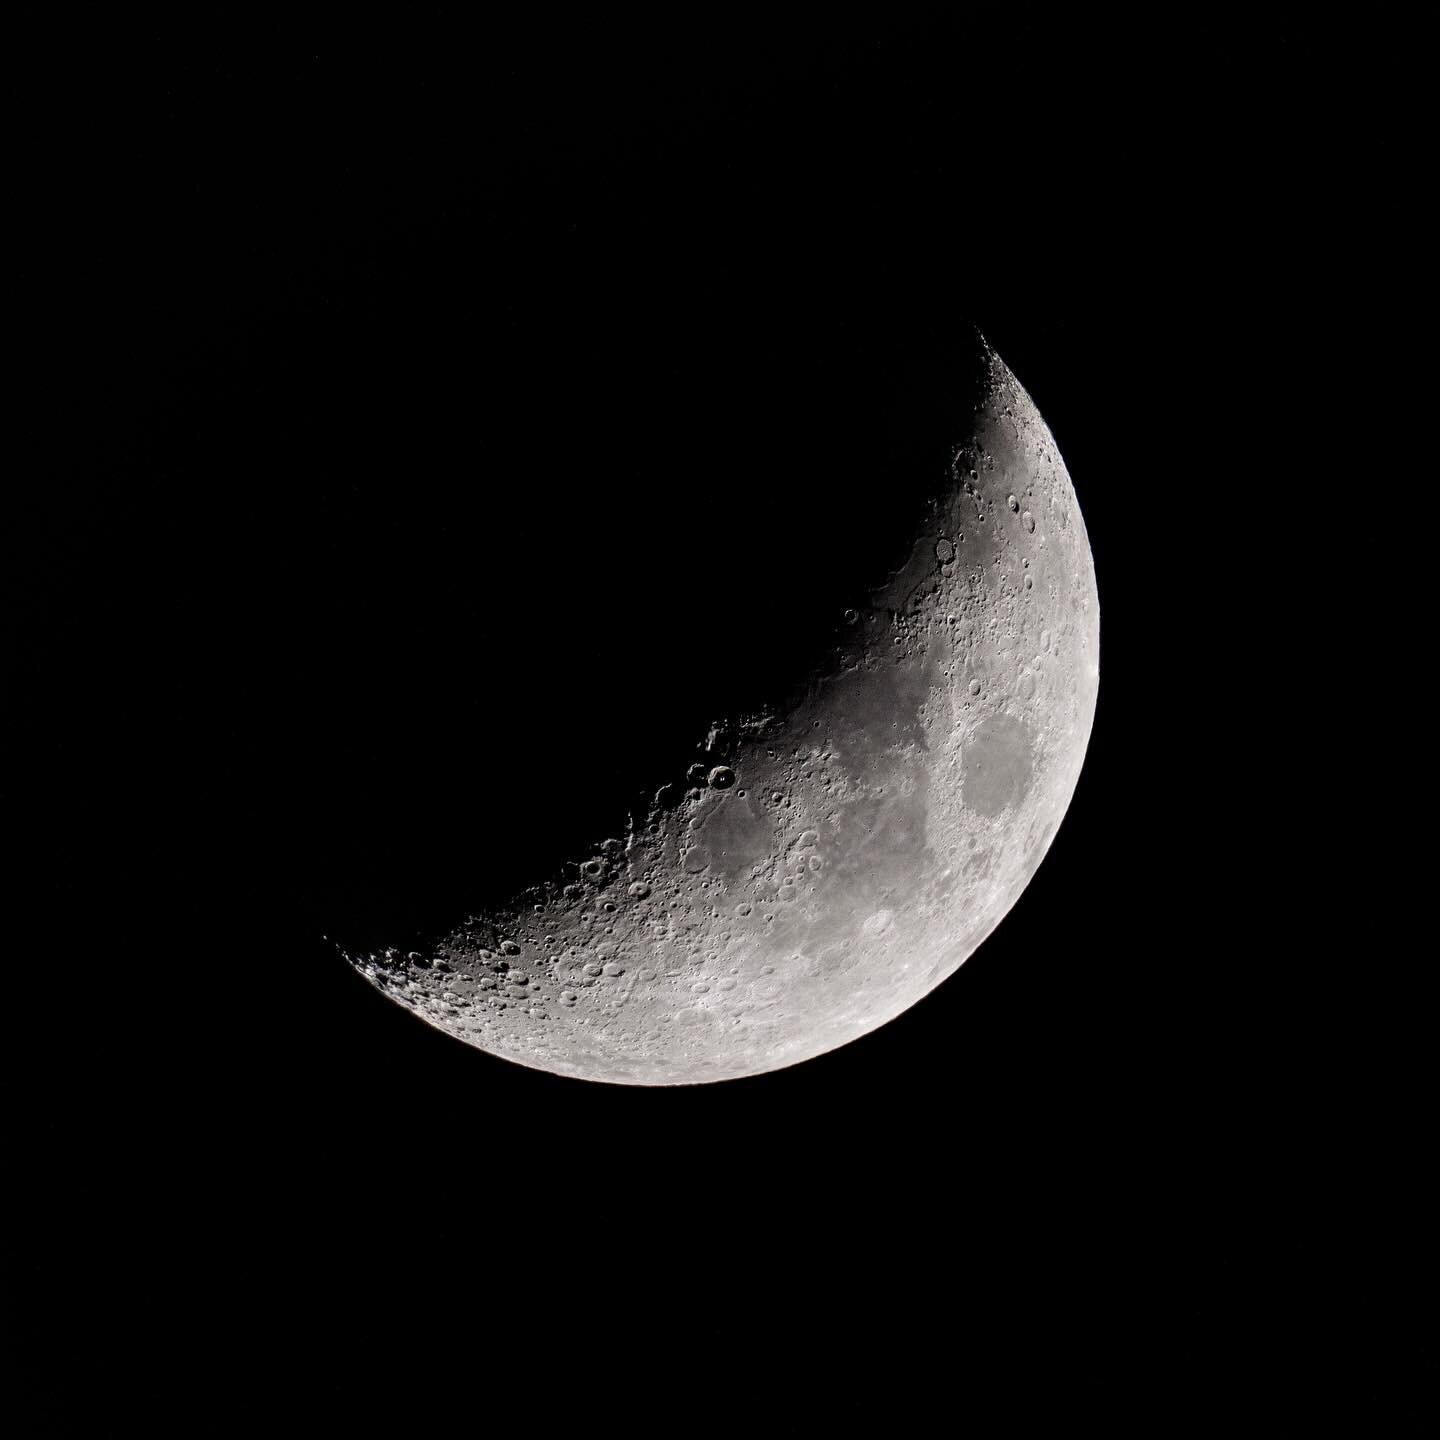 Friday nights crescent moon 🌙 over #kendal
The craters are just unreal. Look small but I&rsquo;m sure they are as big as any country. Swipe left to zoom!! 

#astro #moon #sonyphotography #moonshots #space #stars #fullmoon #placetobe #igdaily #fyp #t